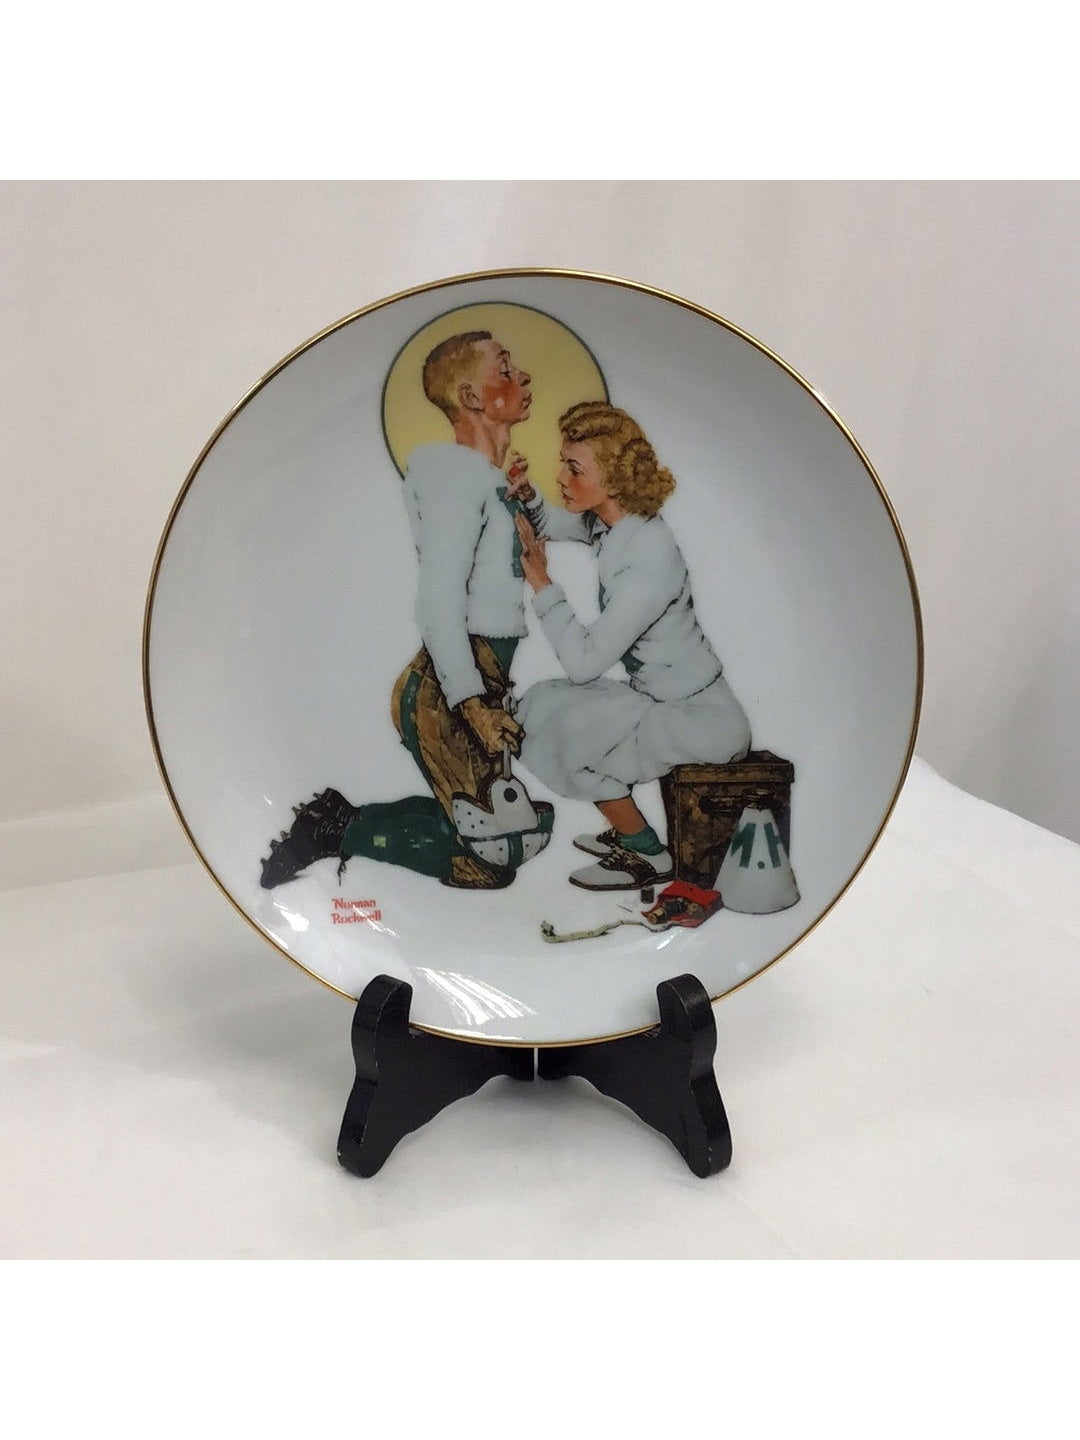 Danbury Mint - Norman Rockwell “Young Love” Collection, "The Letterman" - The Kennedy Collective Thrift - 